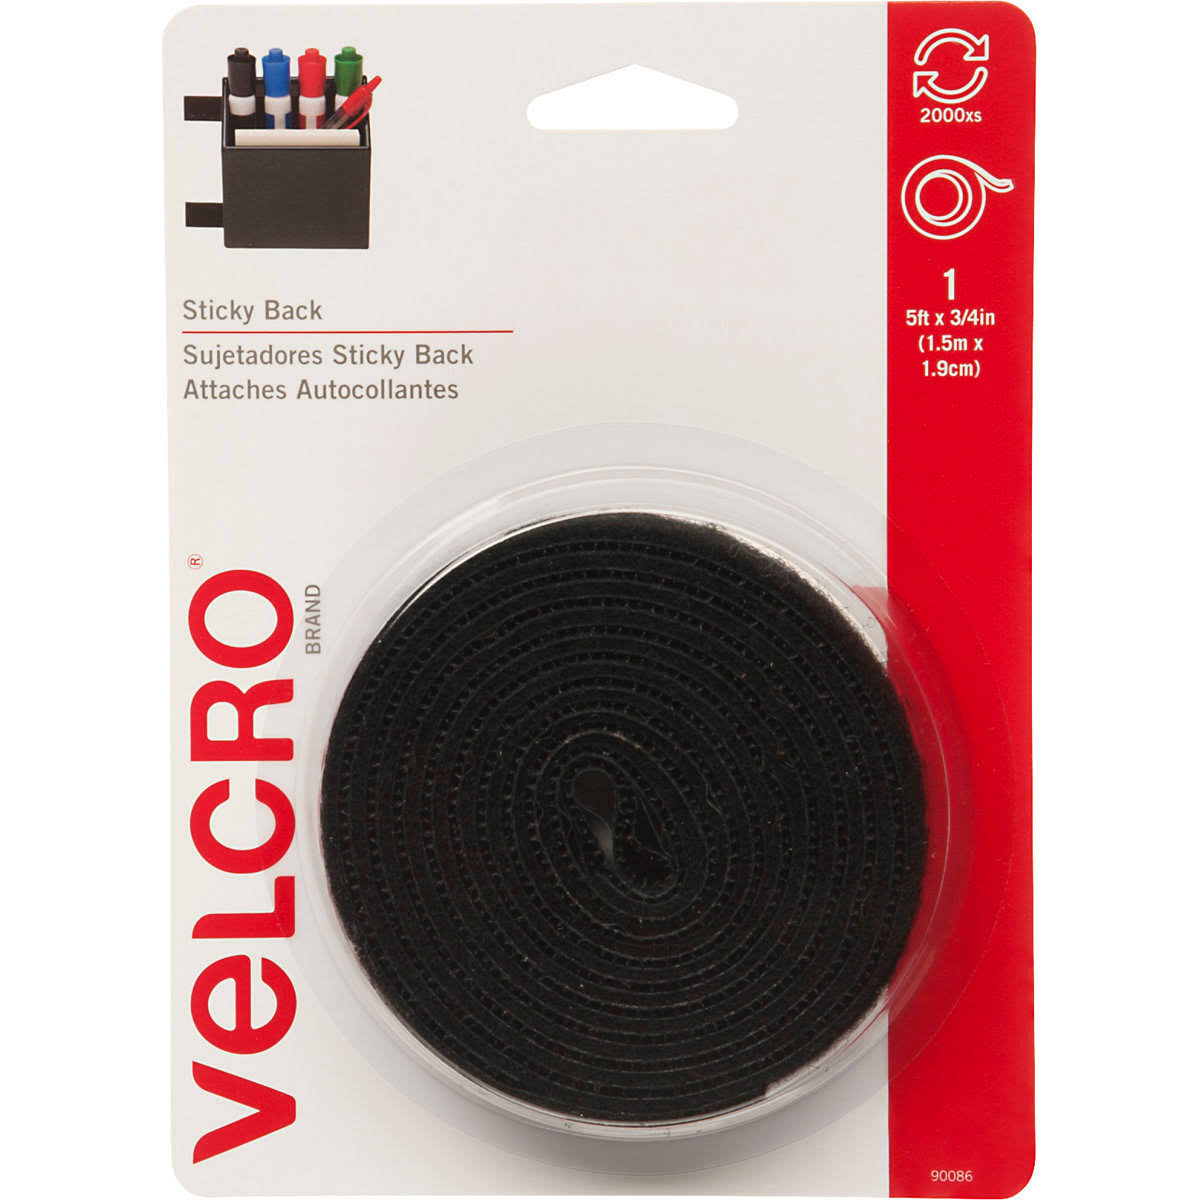 Velcro Sticky-back Hook and Loop Fastener Tape - with Dispenser, 3/4" X 5'